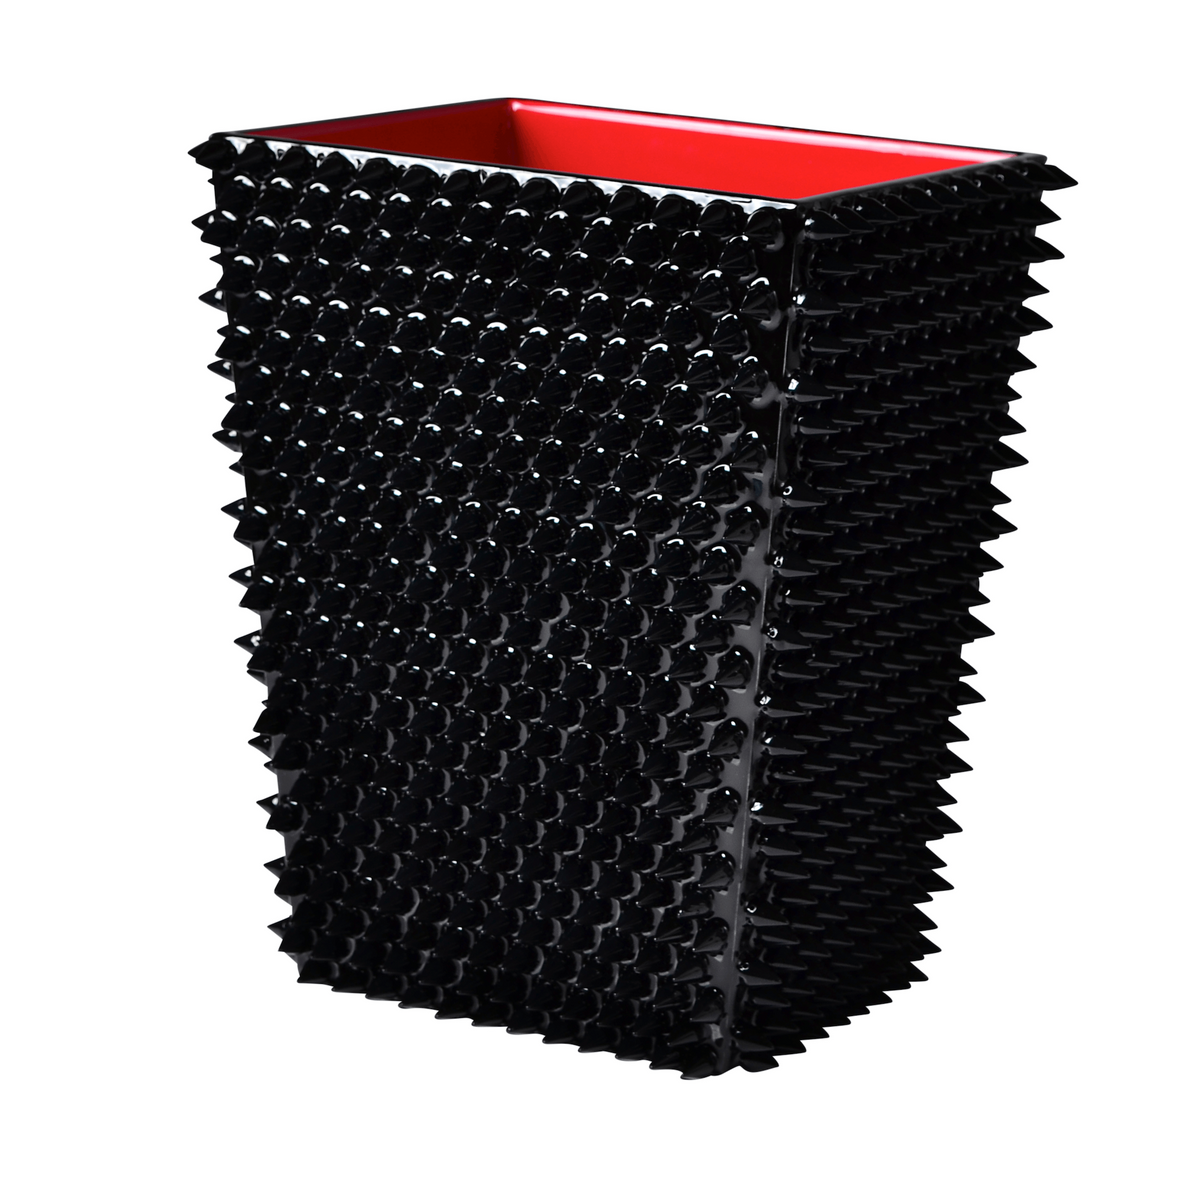 Mike and Ally Quill Bath Accessories - Black / Red